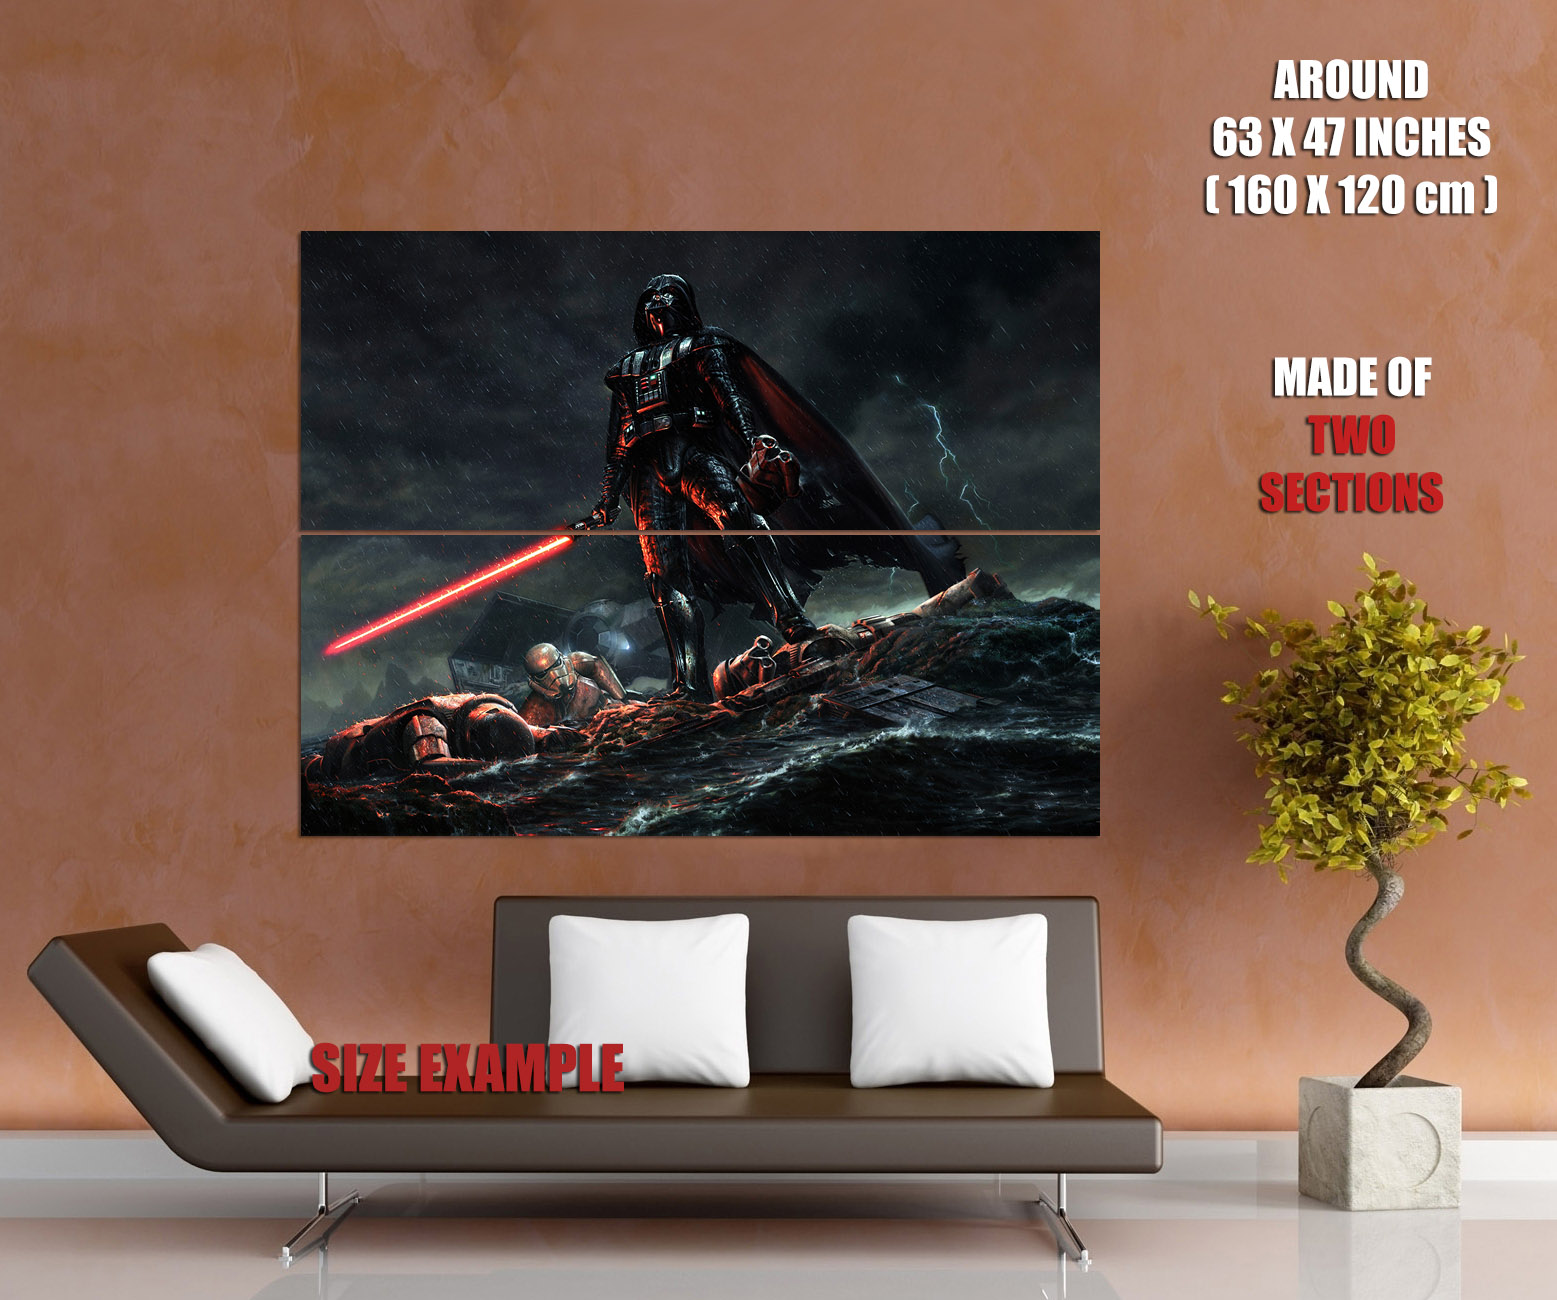 Darth Vader Stormtroopers Star Wars Movie Awesome Art HUGE GIANT PRINT POSTER